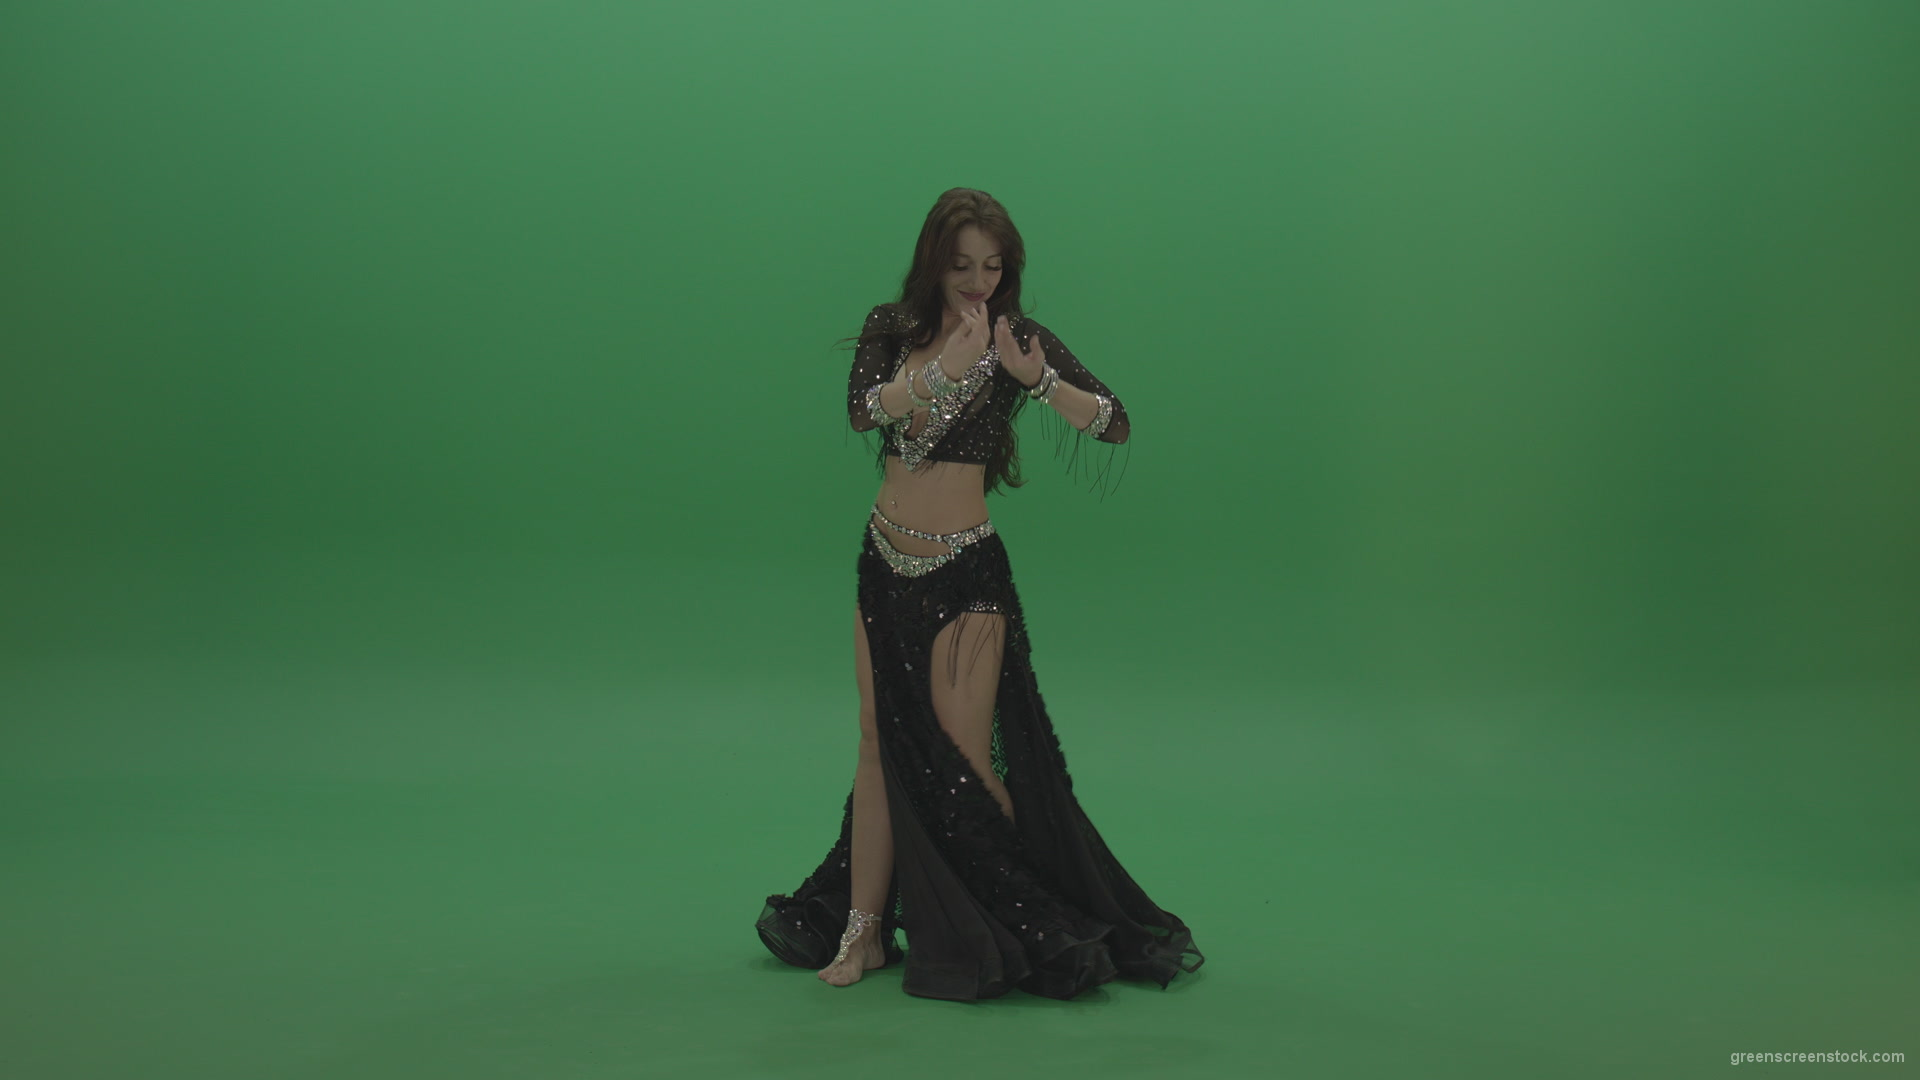 vj video background Adorable-belly-dancer-in-black-wear-display-amazing-dance-moves-over-chromakey-background_003